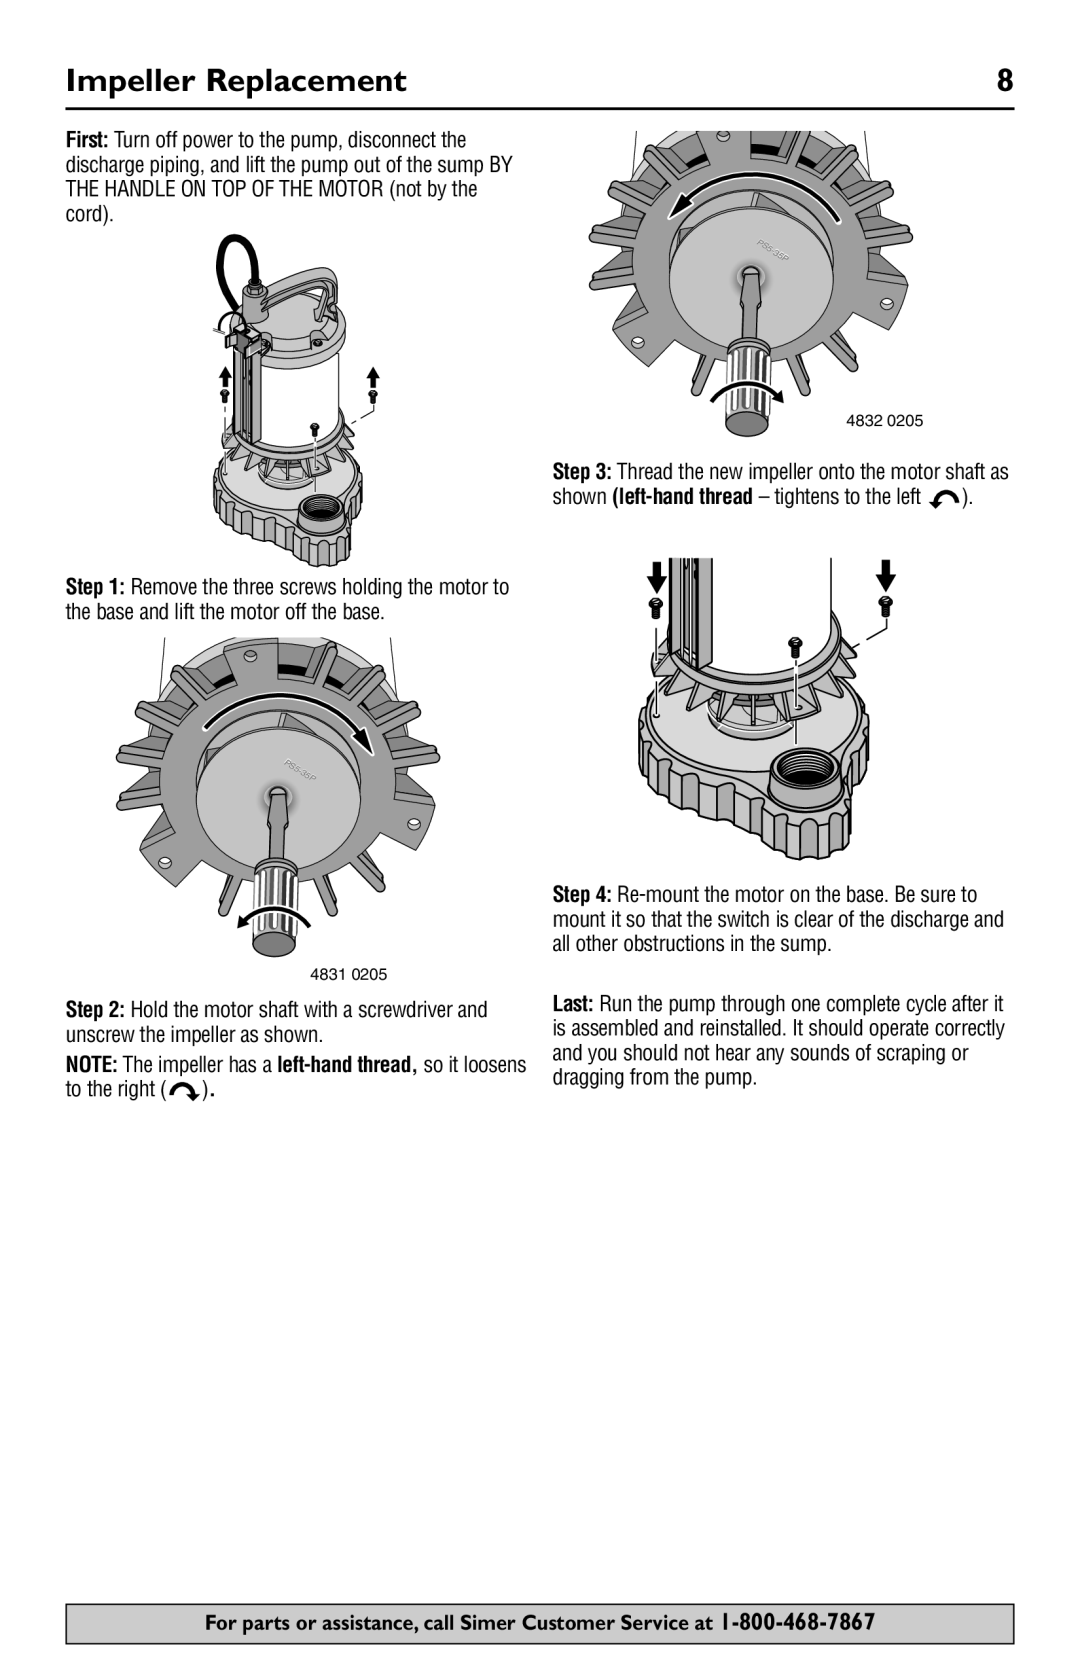 Simer Pumps 3989 owner manual Impeller Replacement, shown left-handthread - tightens to the left 